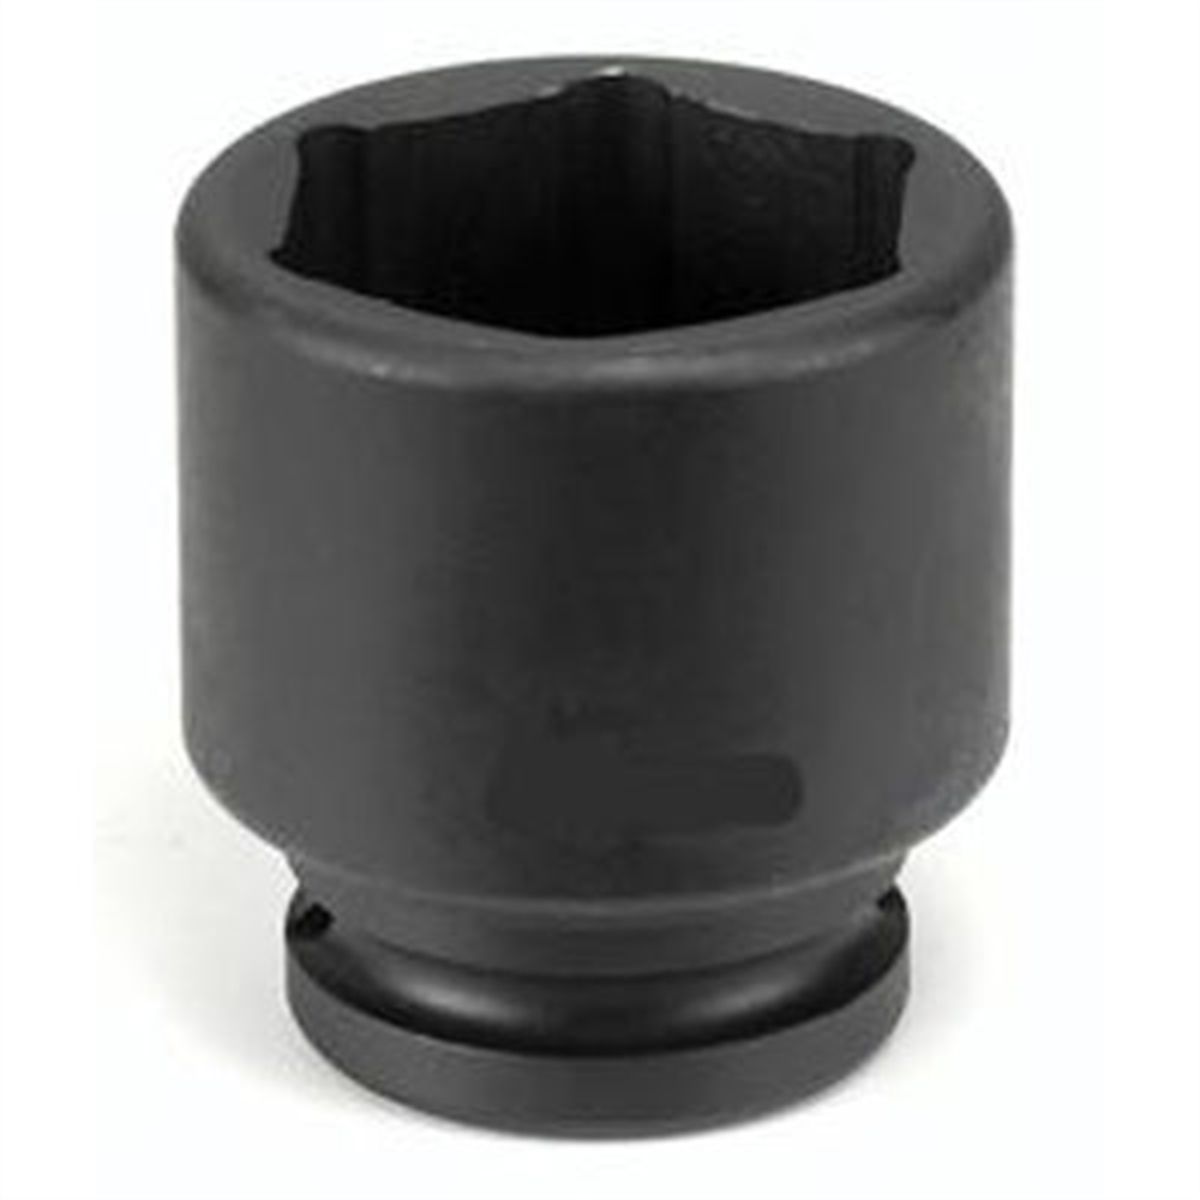 MITOLOY 1 inch drive 85mm Impact Hex Socket 